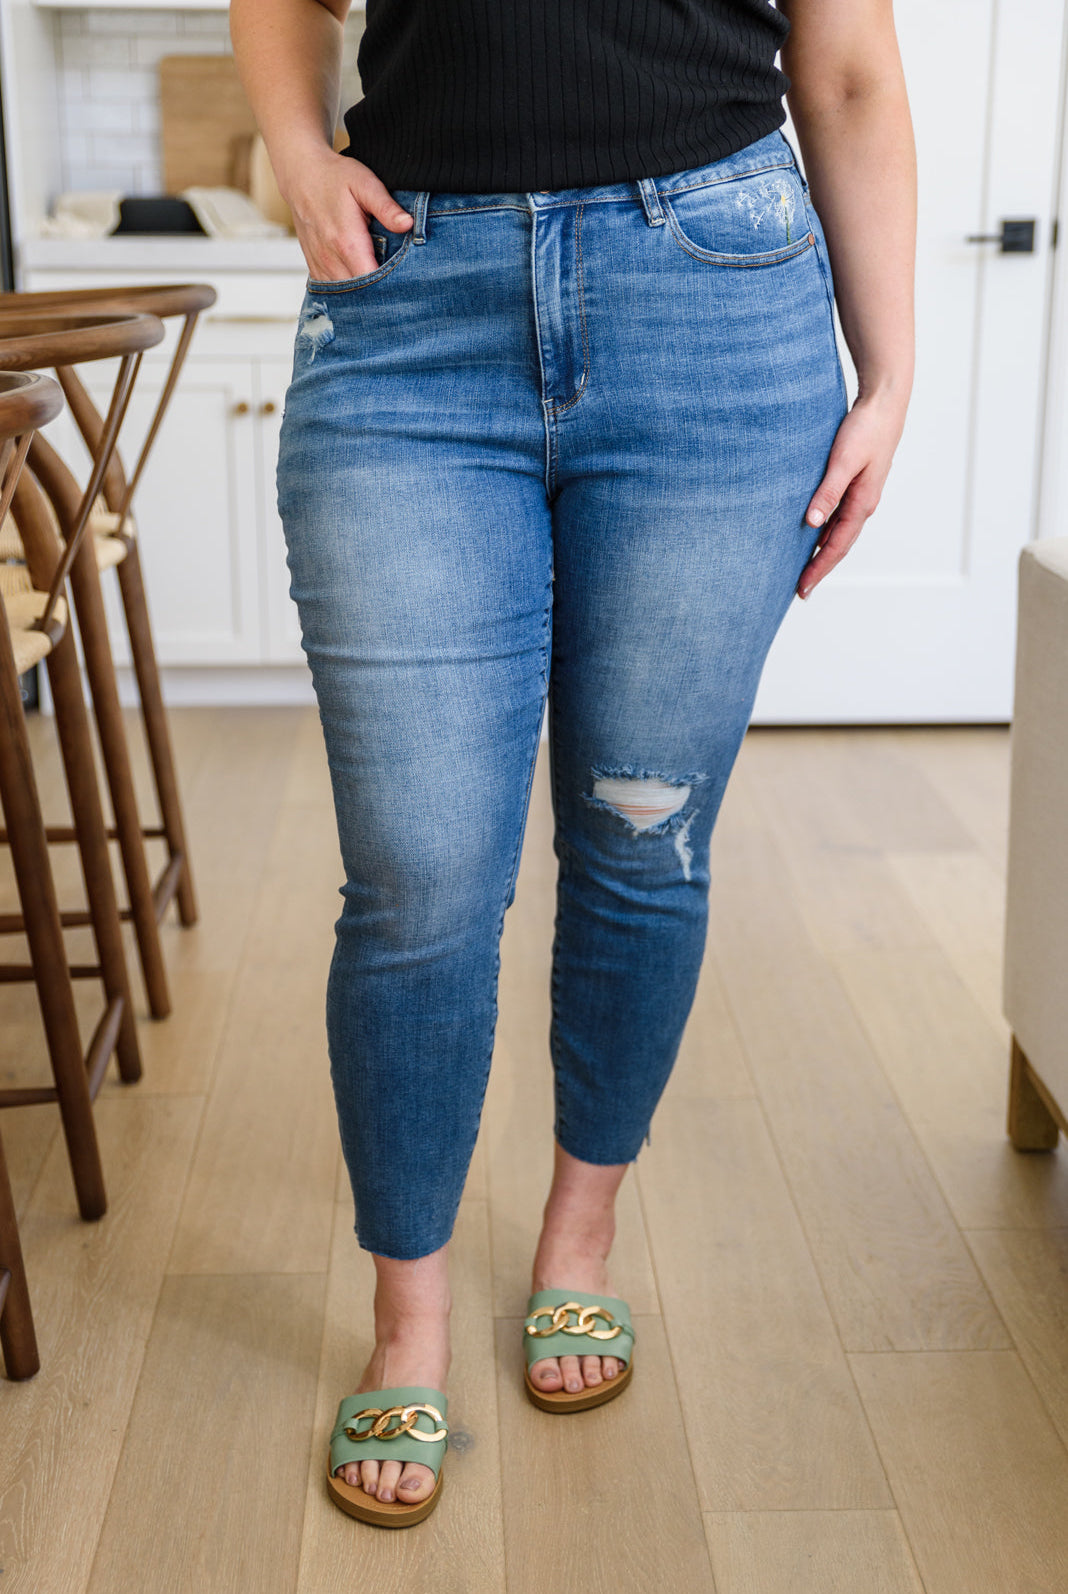 Hi-waisted Dandelion Embroidery Skinny-Jeans- Simply Simpson's Boutique is a Women's Online Fashion Boutique Located in Jupiter, Florida